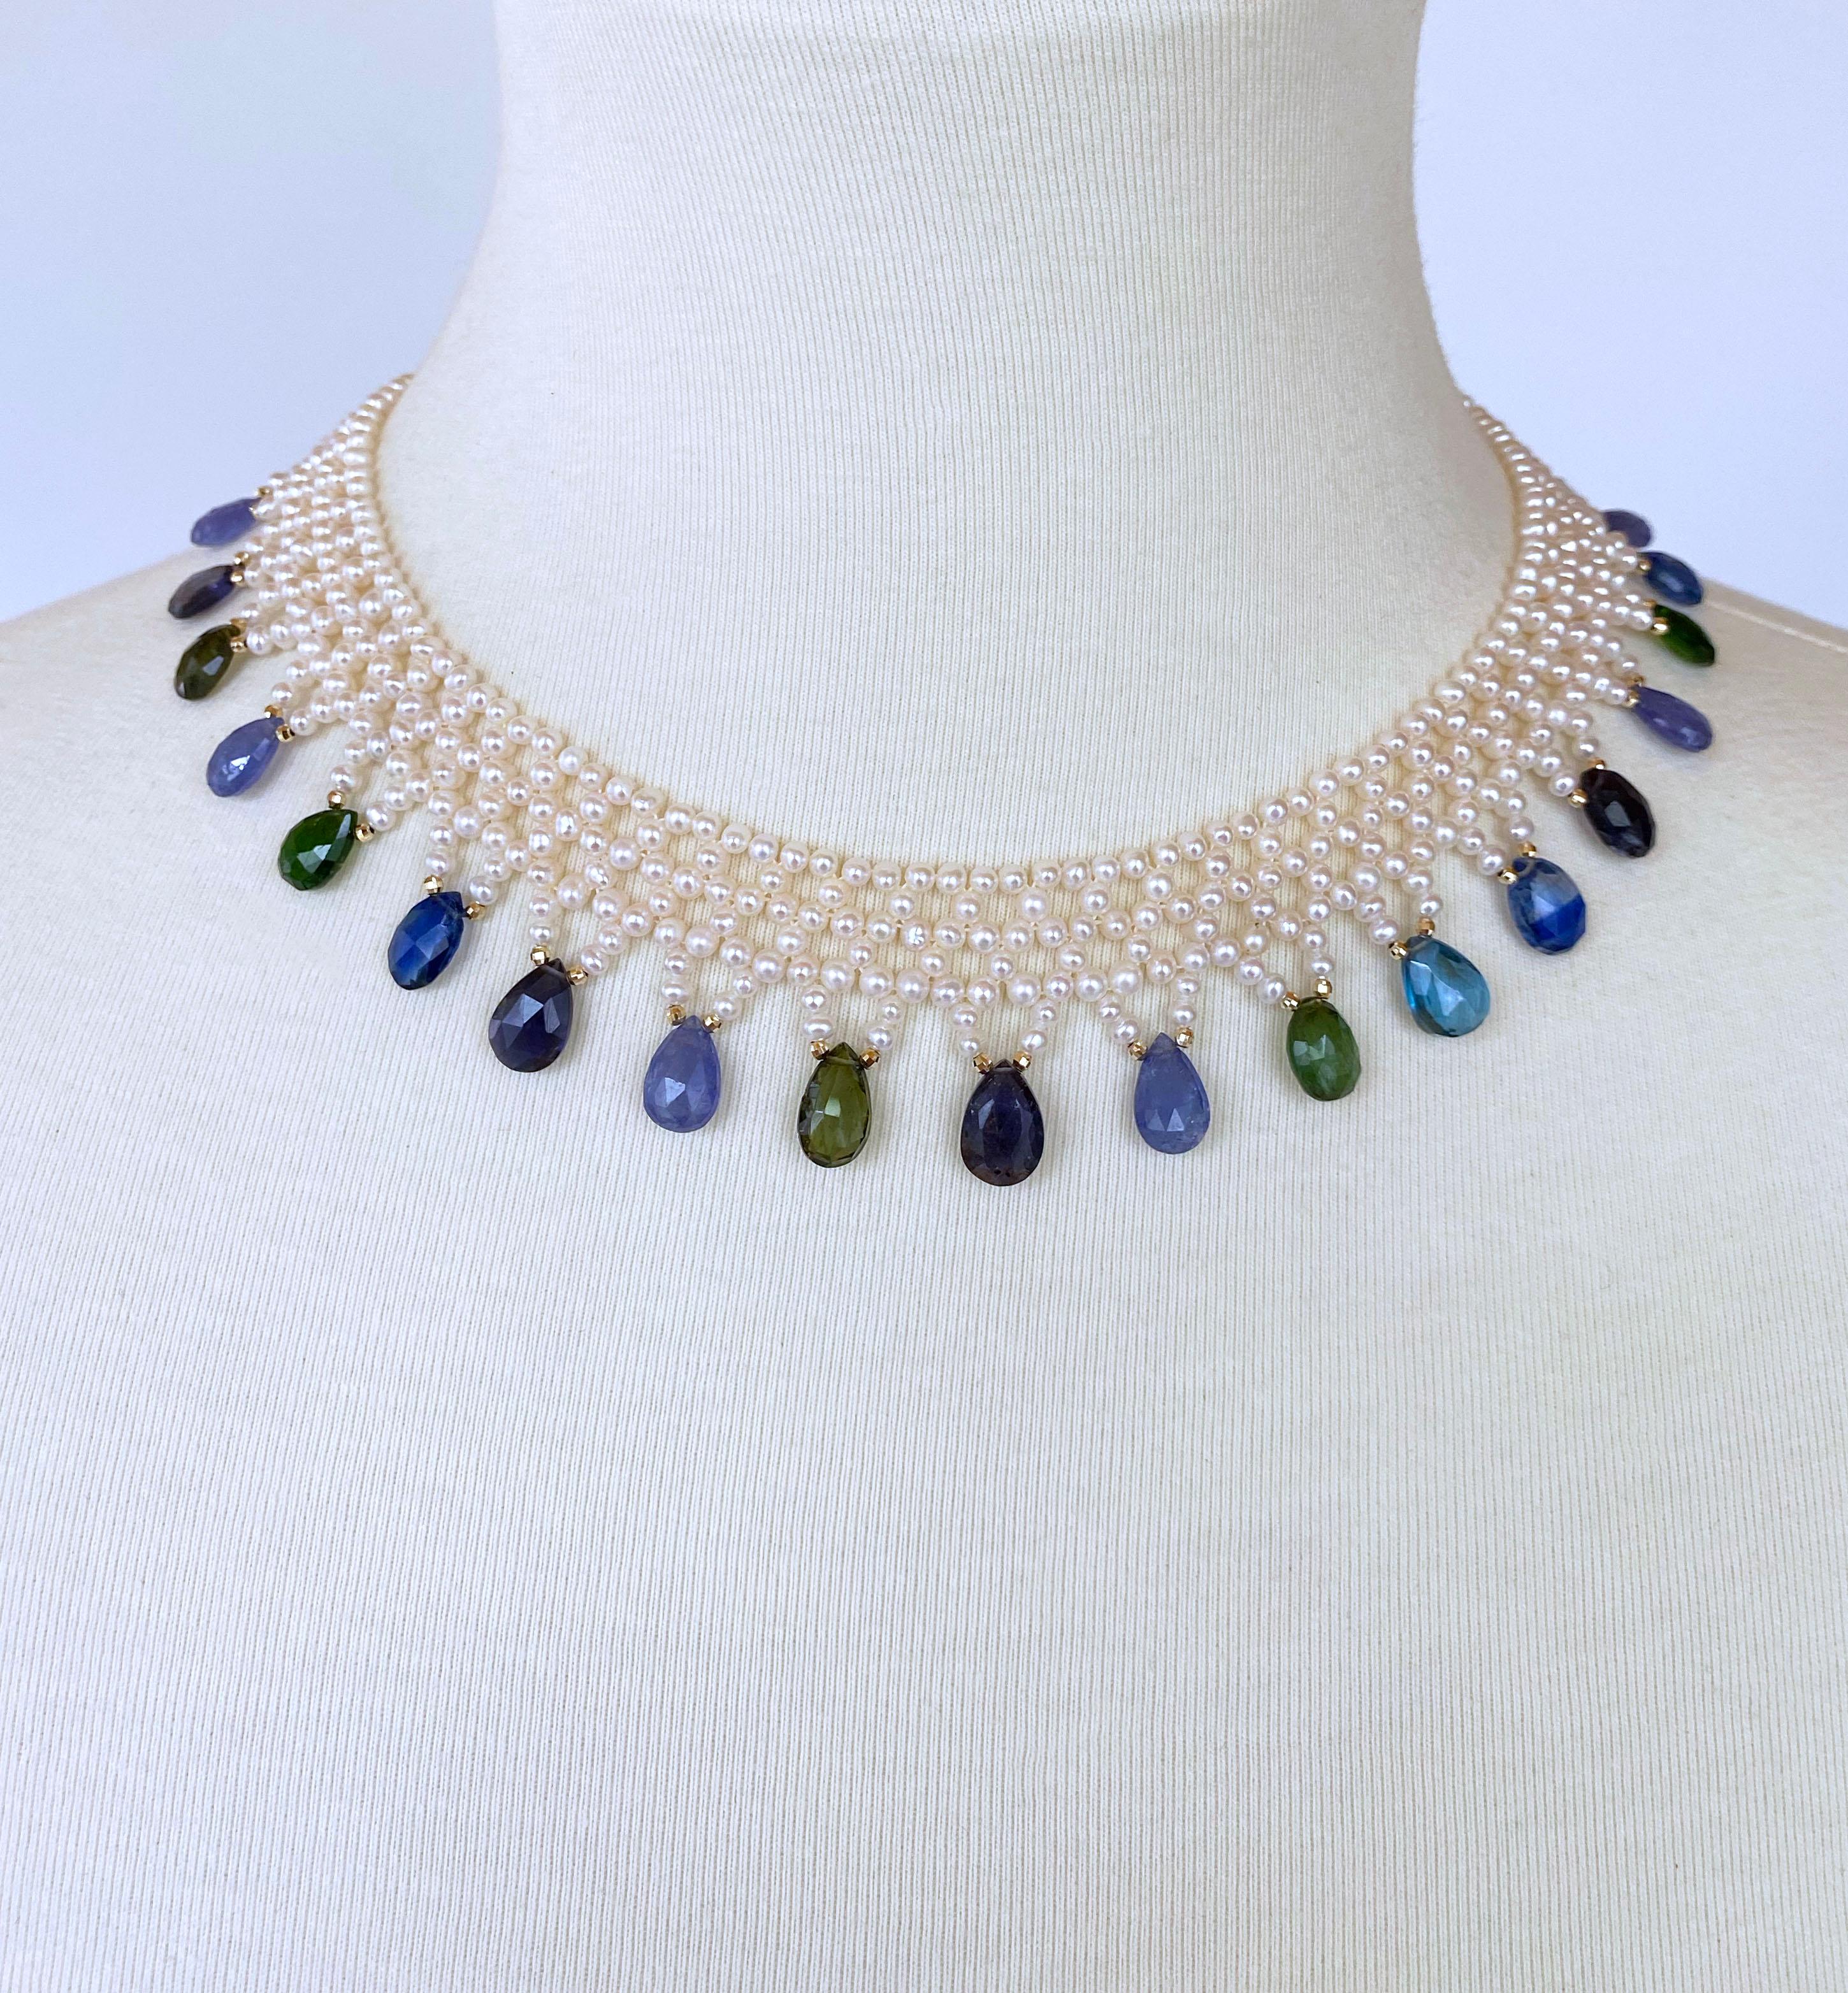 Classic piece from Marina J. This gorgeous hand made necklace features high luster Pearls, woven into a tight lace design. The mutli colored cool toned Jewel briolettes adorn this necklace with faceted 14K Yellow Gold accents. Briolletes around the